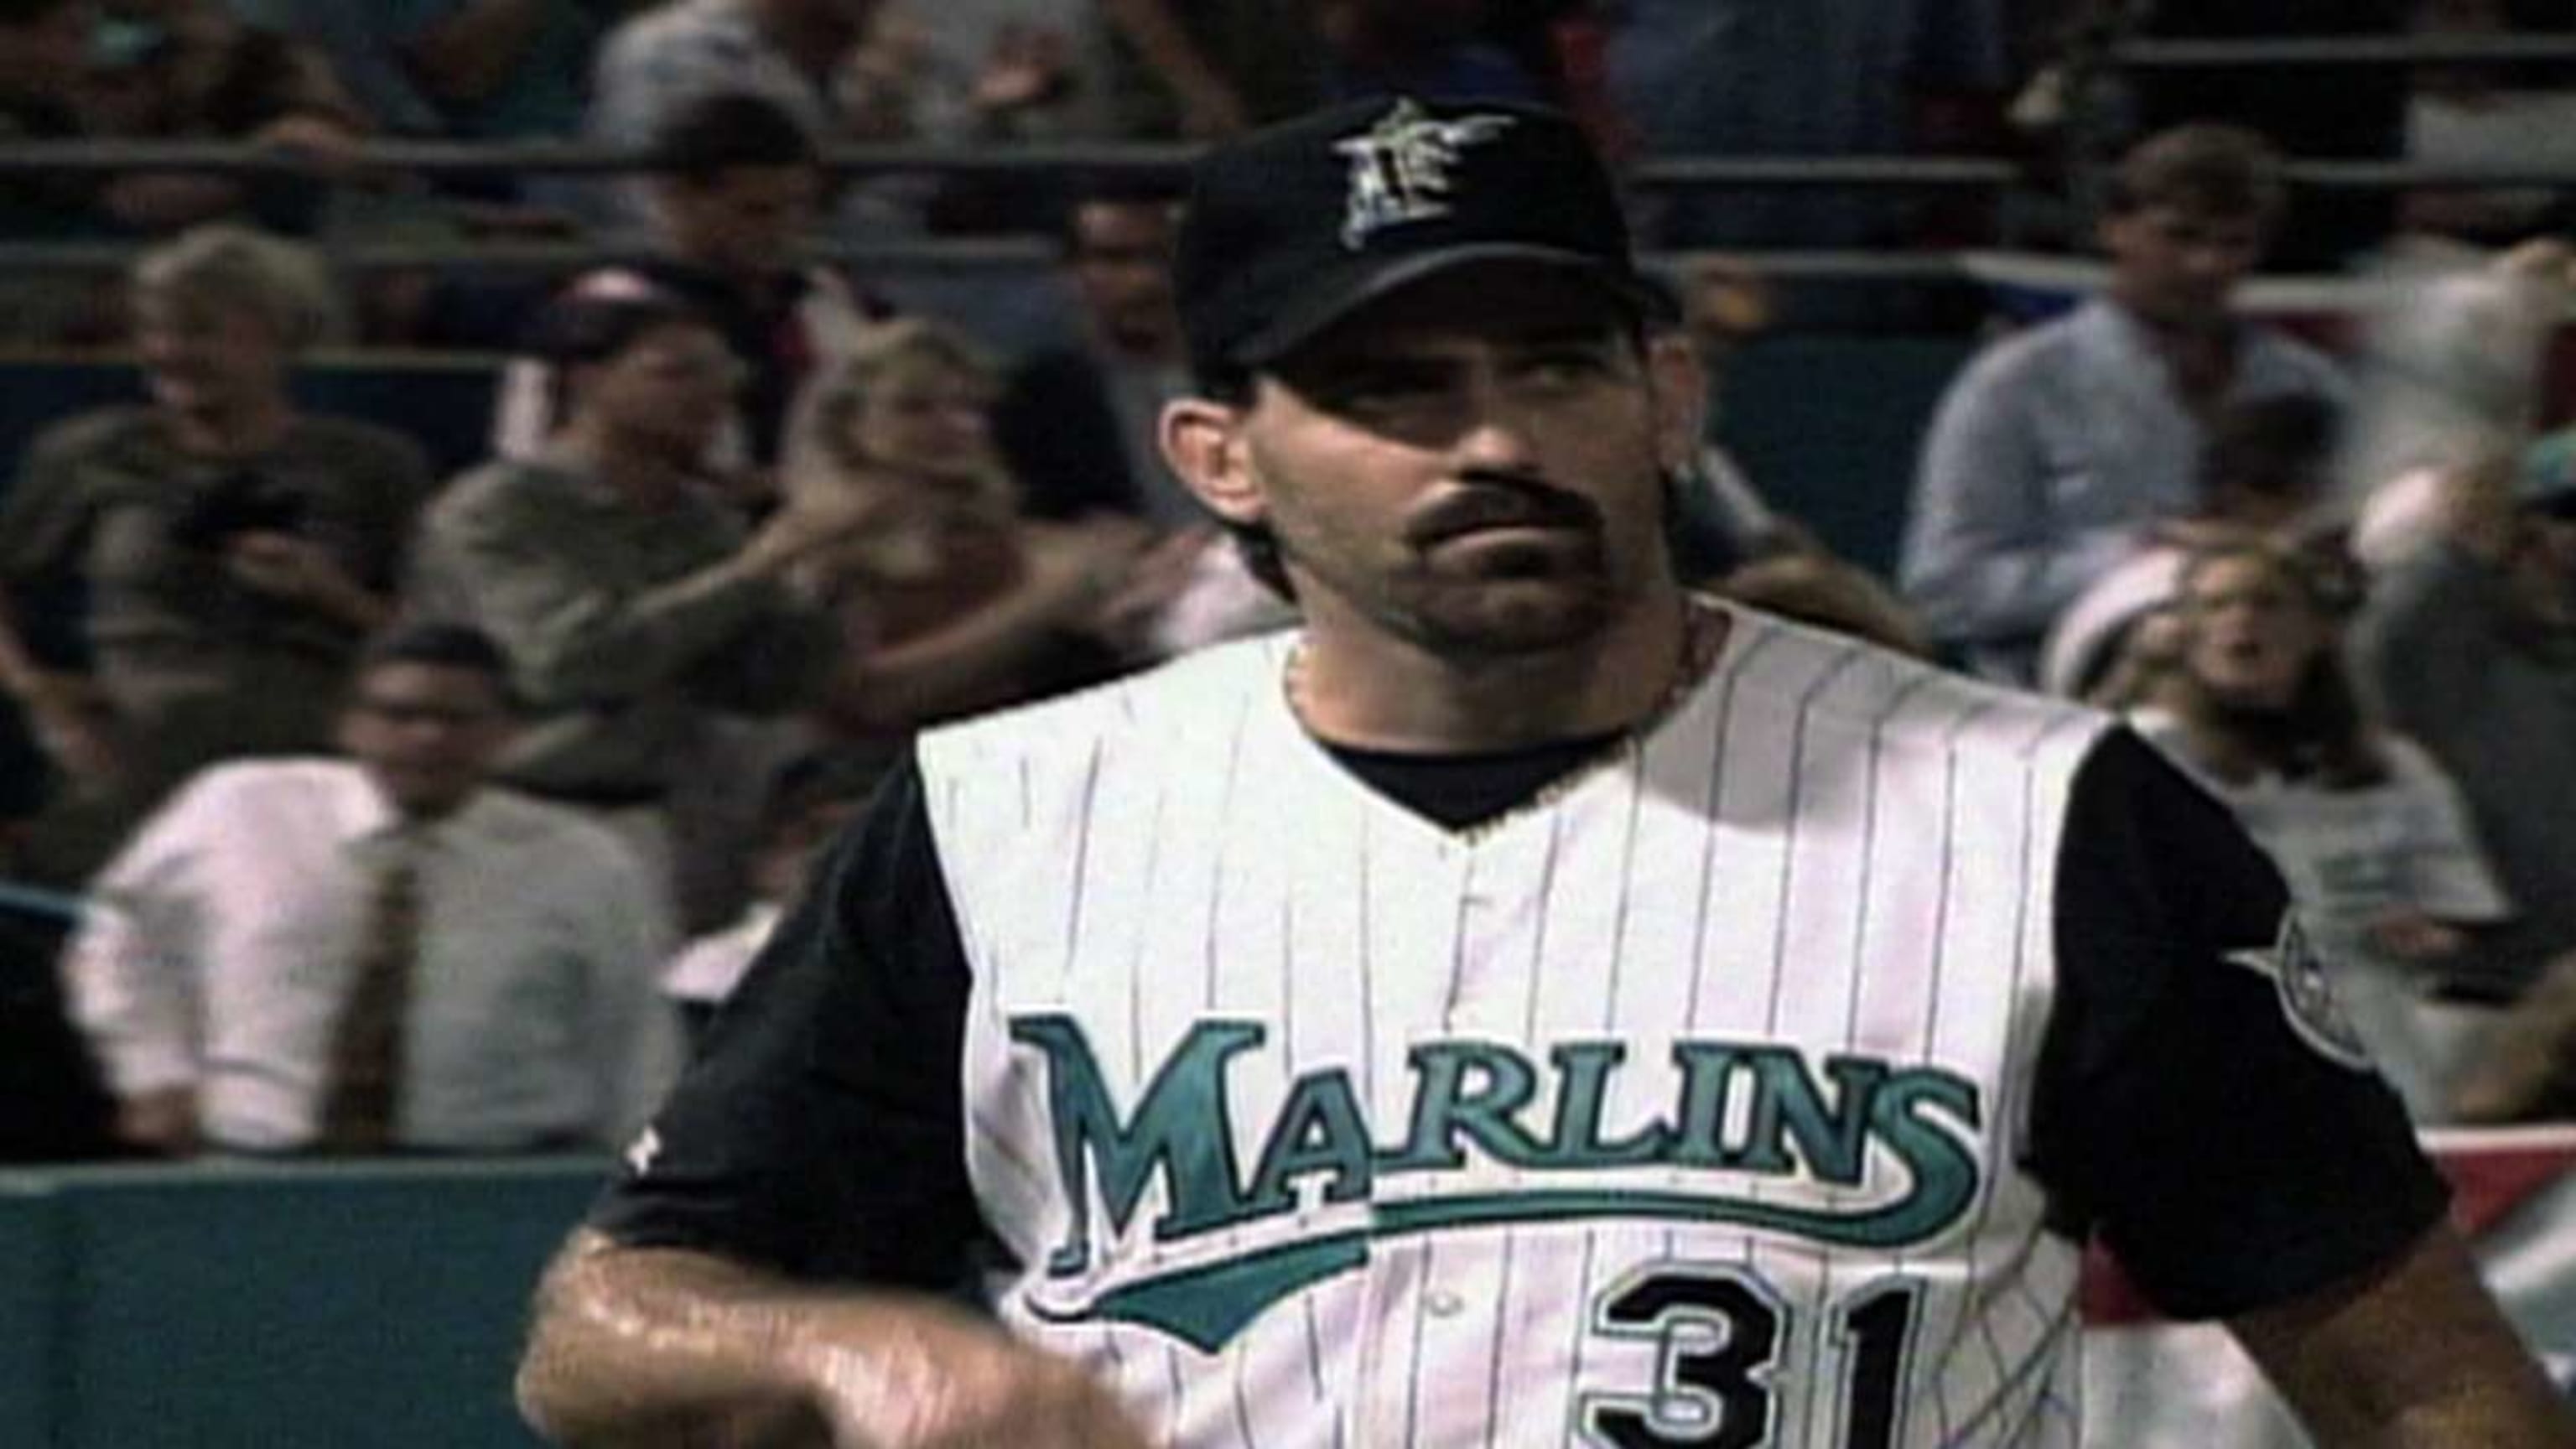 Florida Marlins History: Theft Isn't Always the Answer